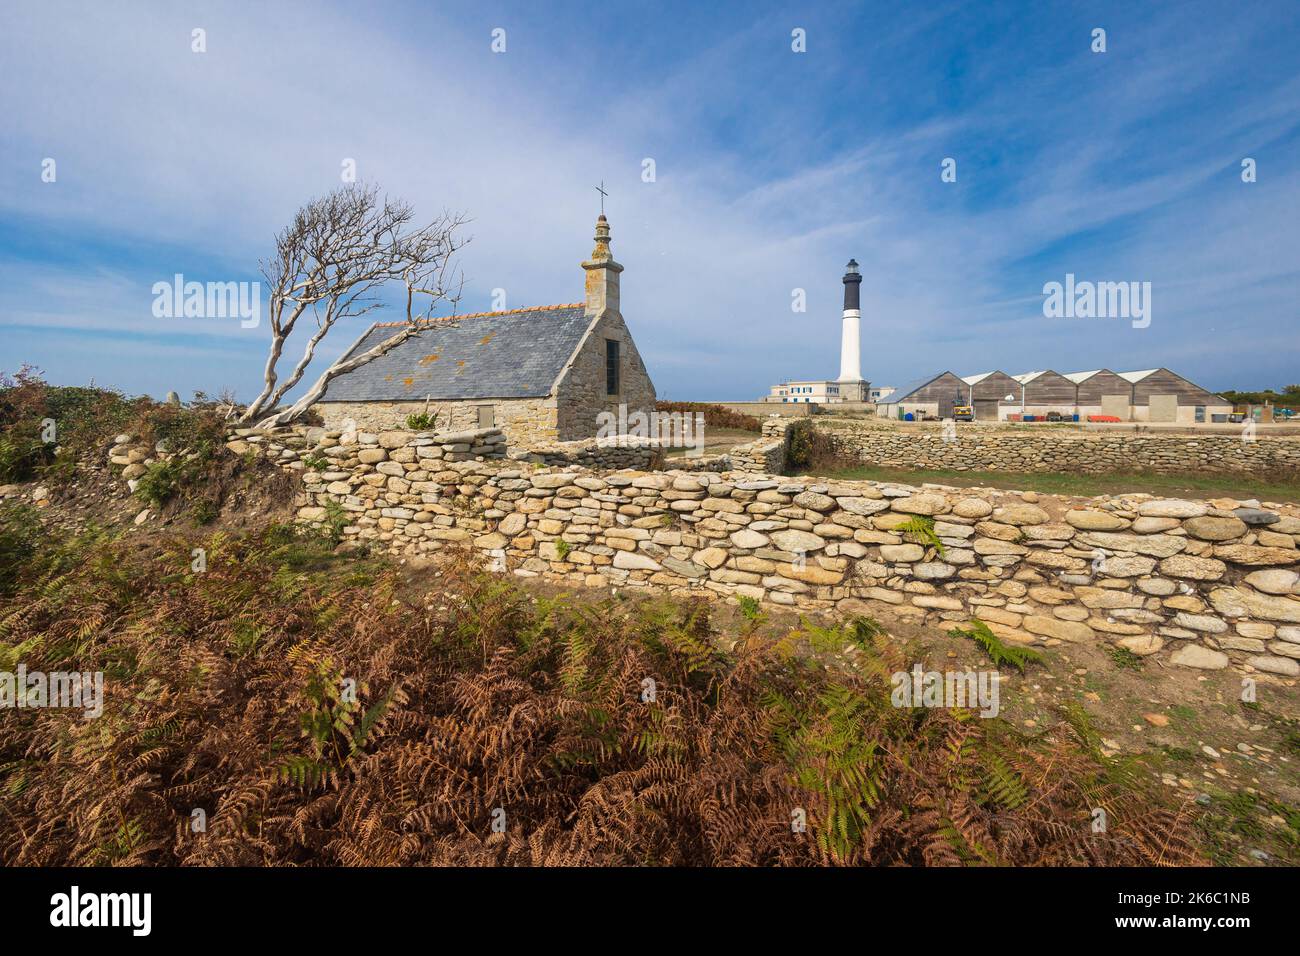 The small chapel and the tall lighthouse of the Sein island, Brittany, France Stock Photo